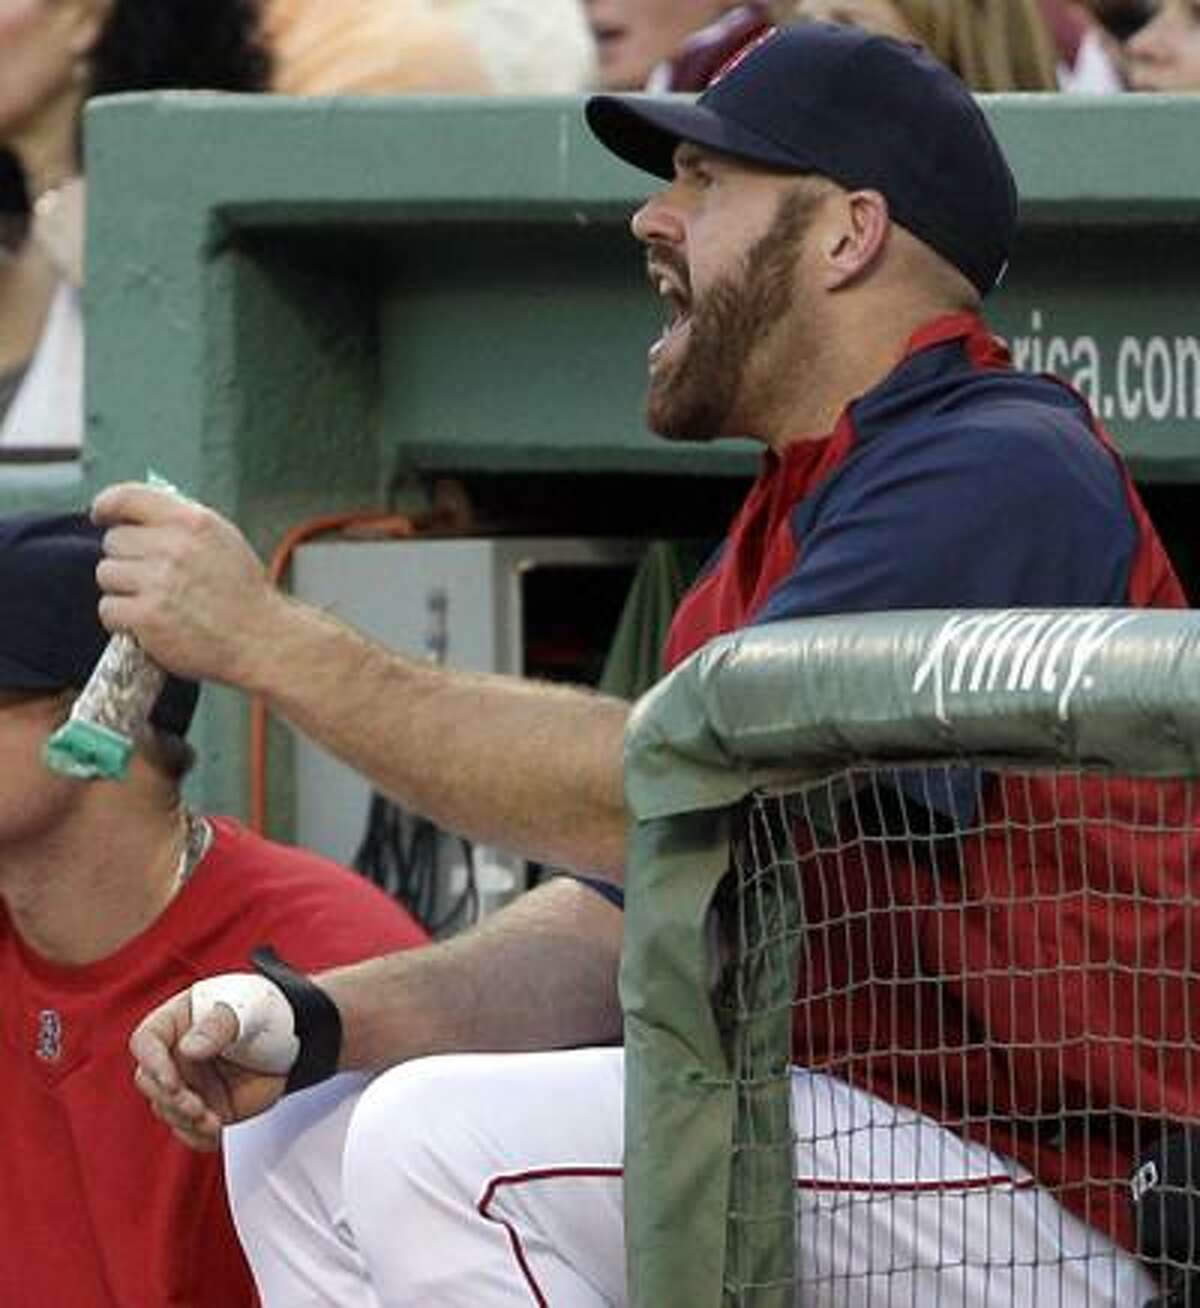 Boston's Kevin Youkilis will undergo surgery on his right hand Friday and miss the remainder of the season. (Associated Press/Elise Amendola)